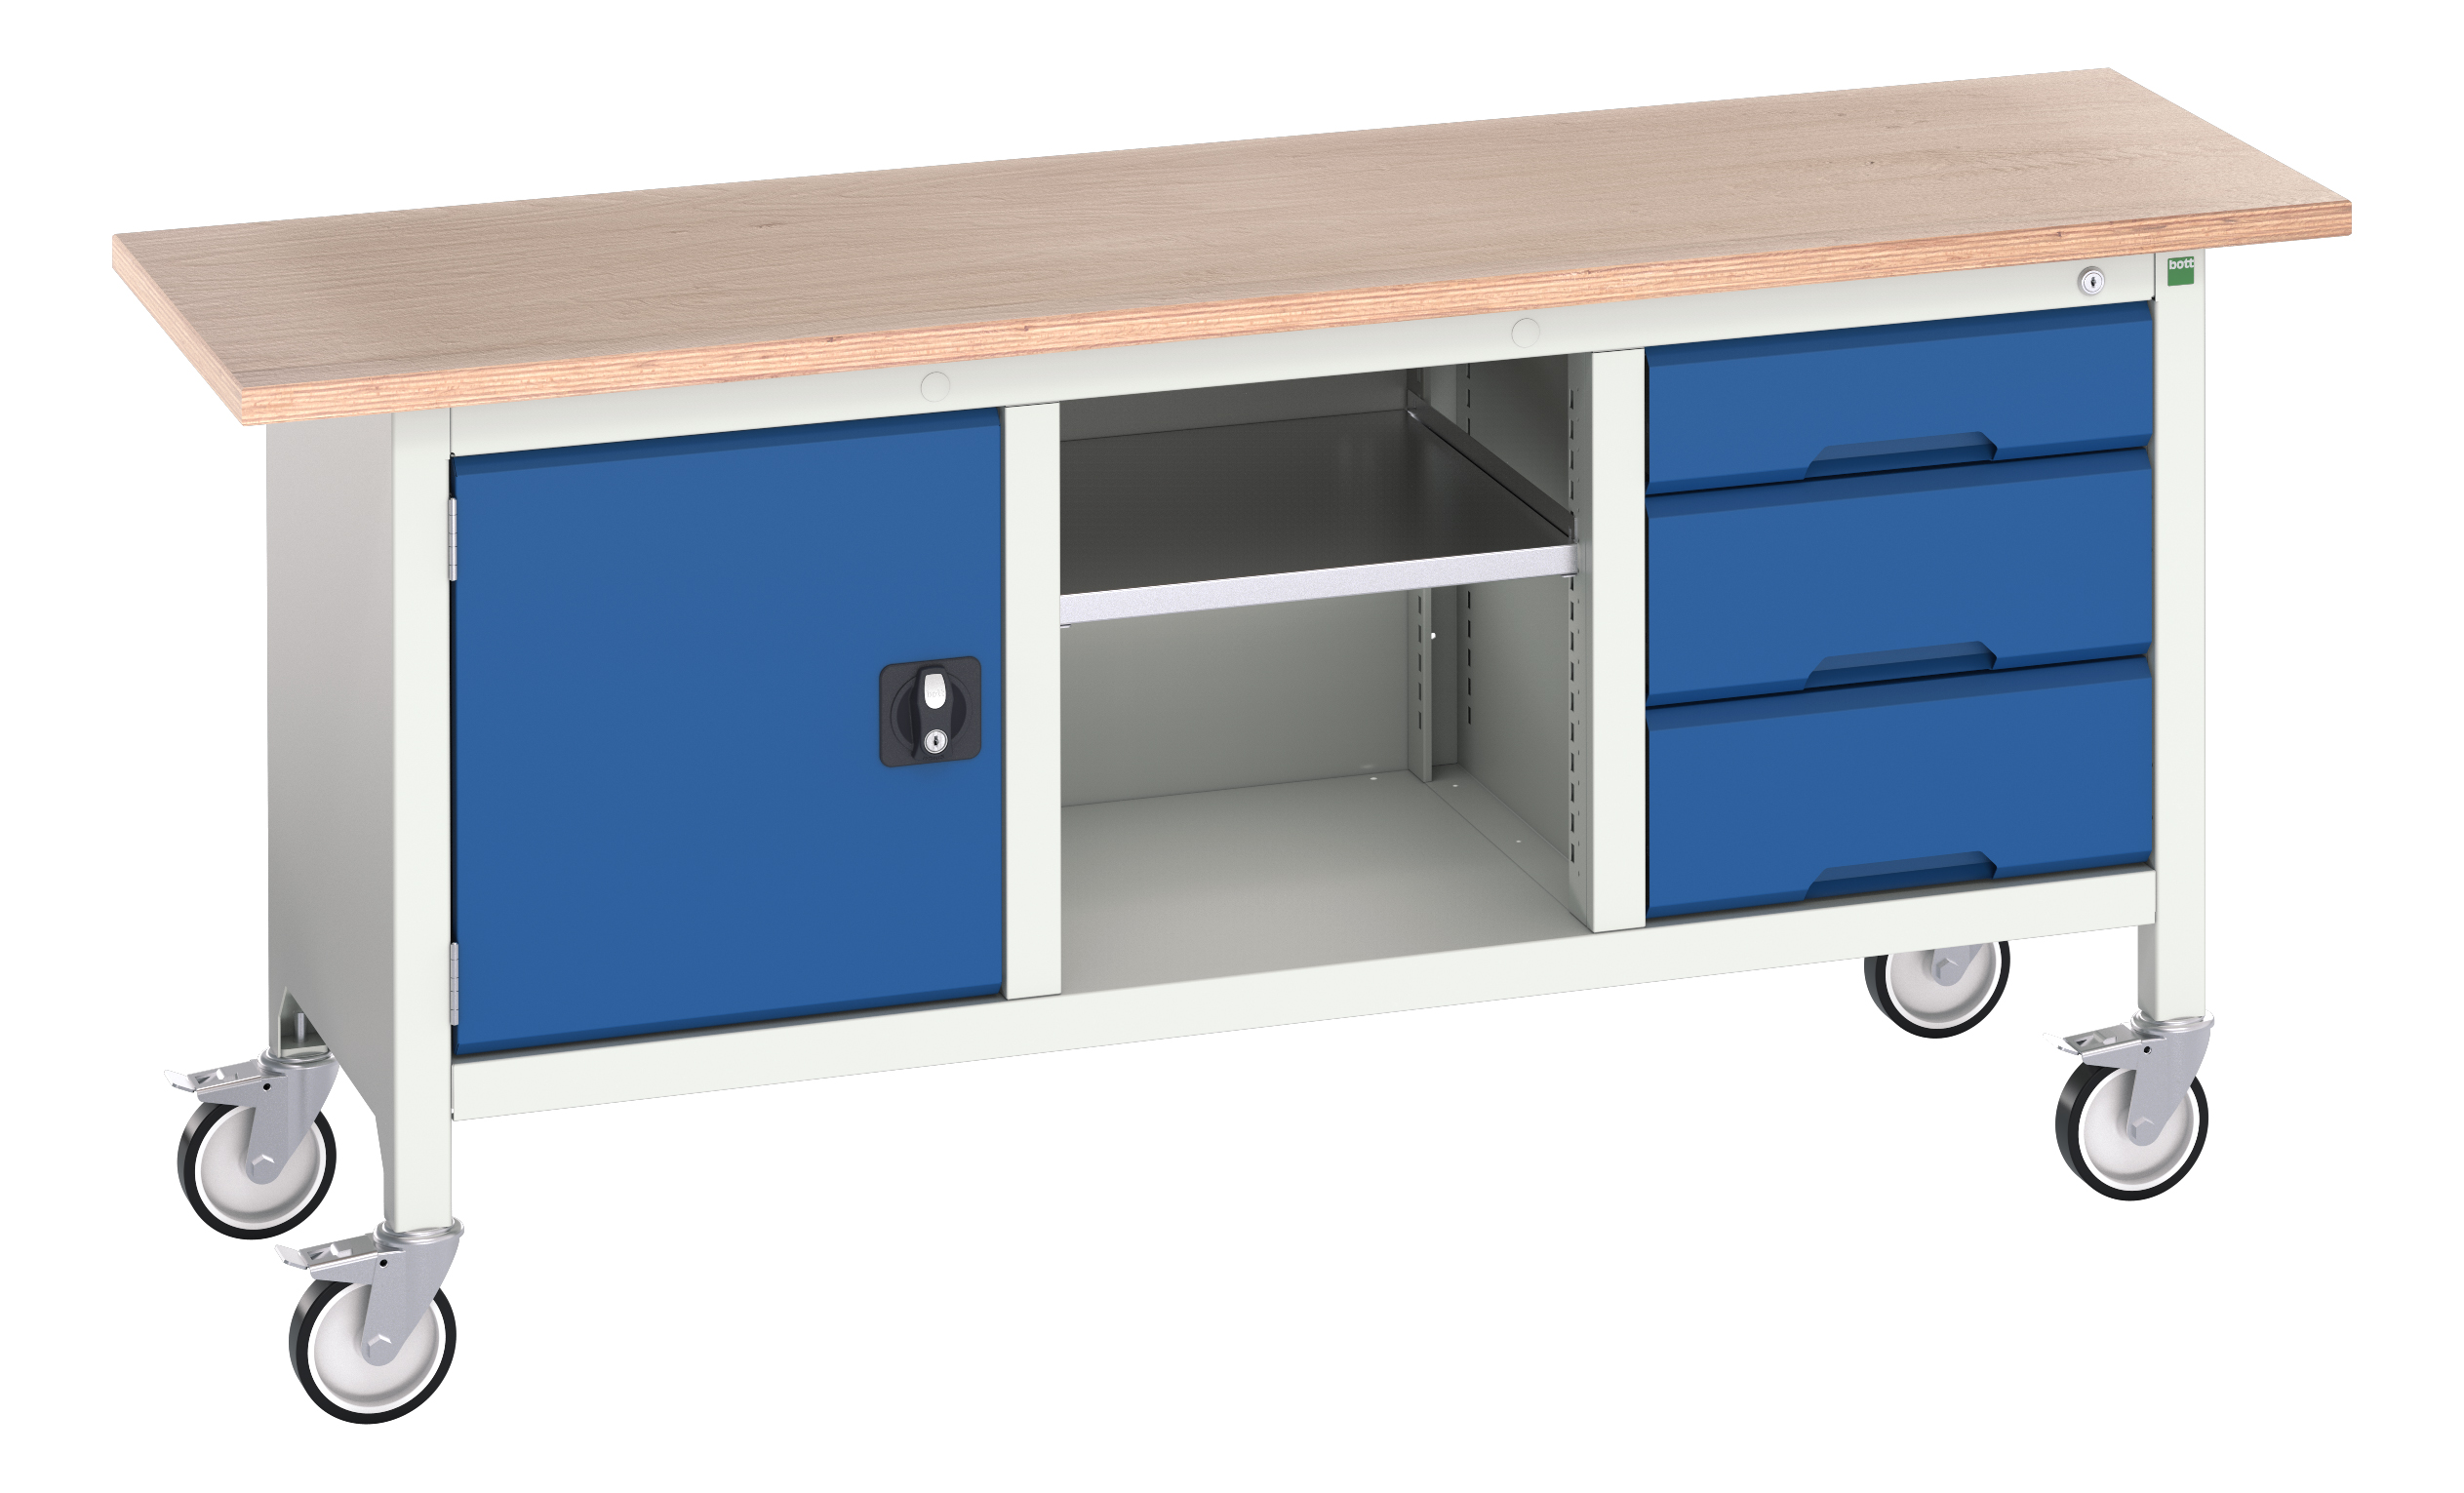 Bott Verso Mobile Storage Bench With Full Cupboard / Open Cupboard / 3 Drawer Cab - 16923220.11